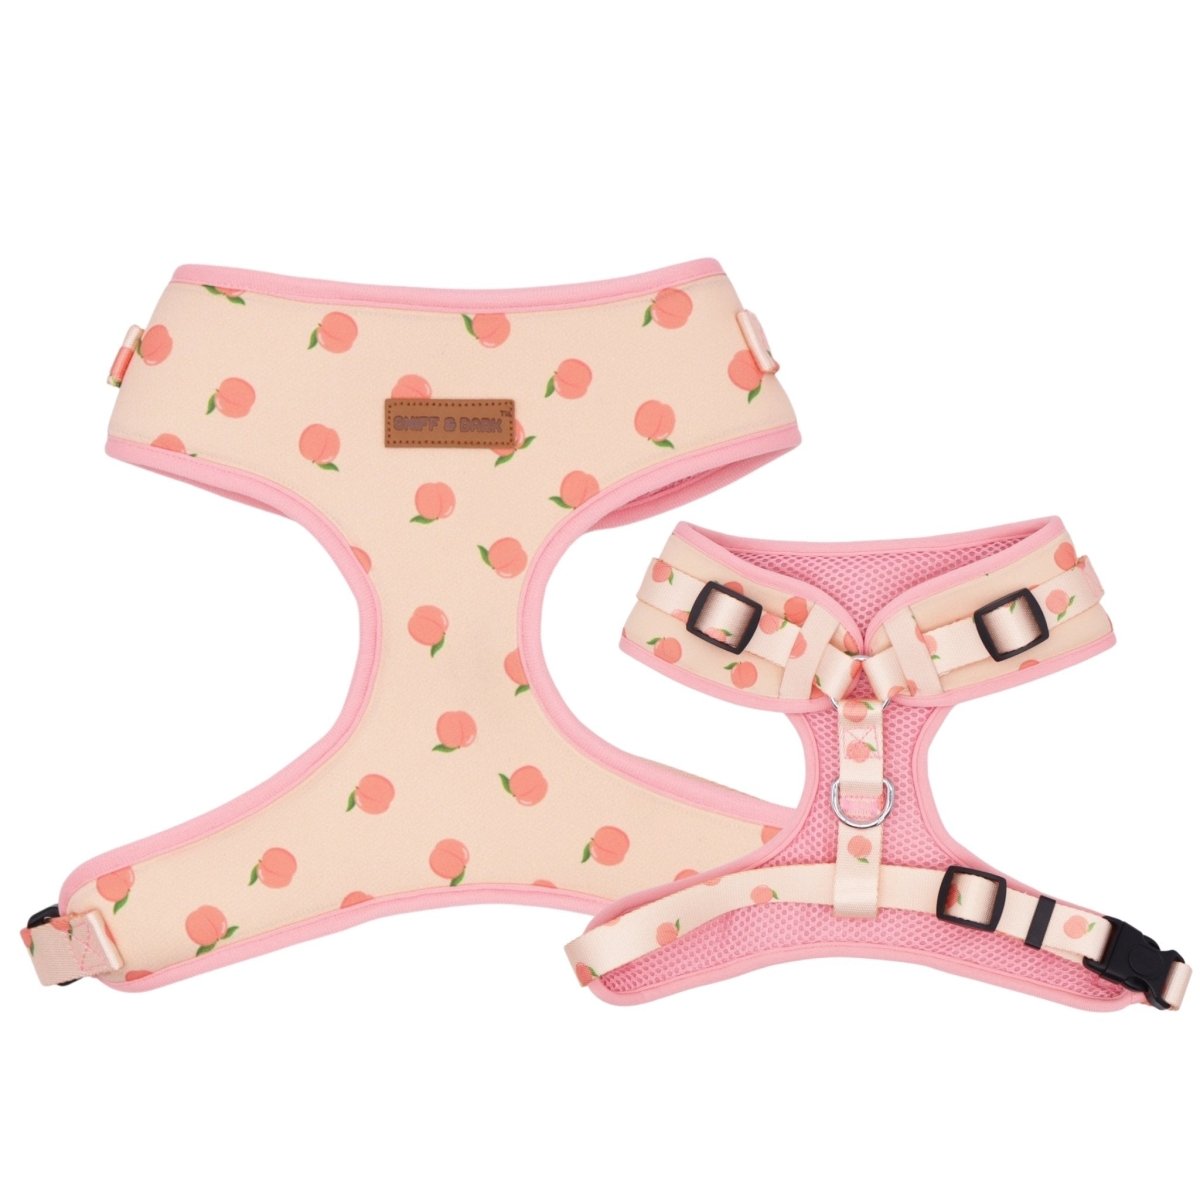 cute dog harness for large dogs - best escape proof dog harness - Peach Pattern Harness for dogs boys and girls